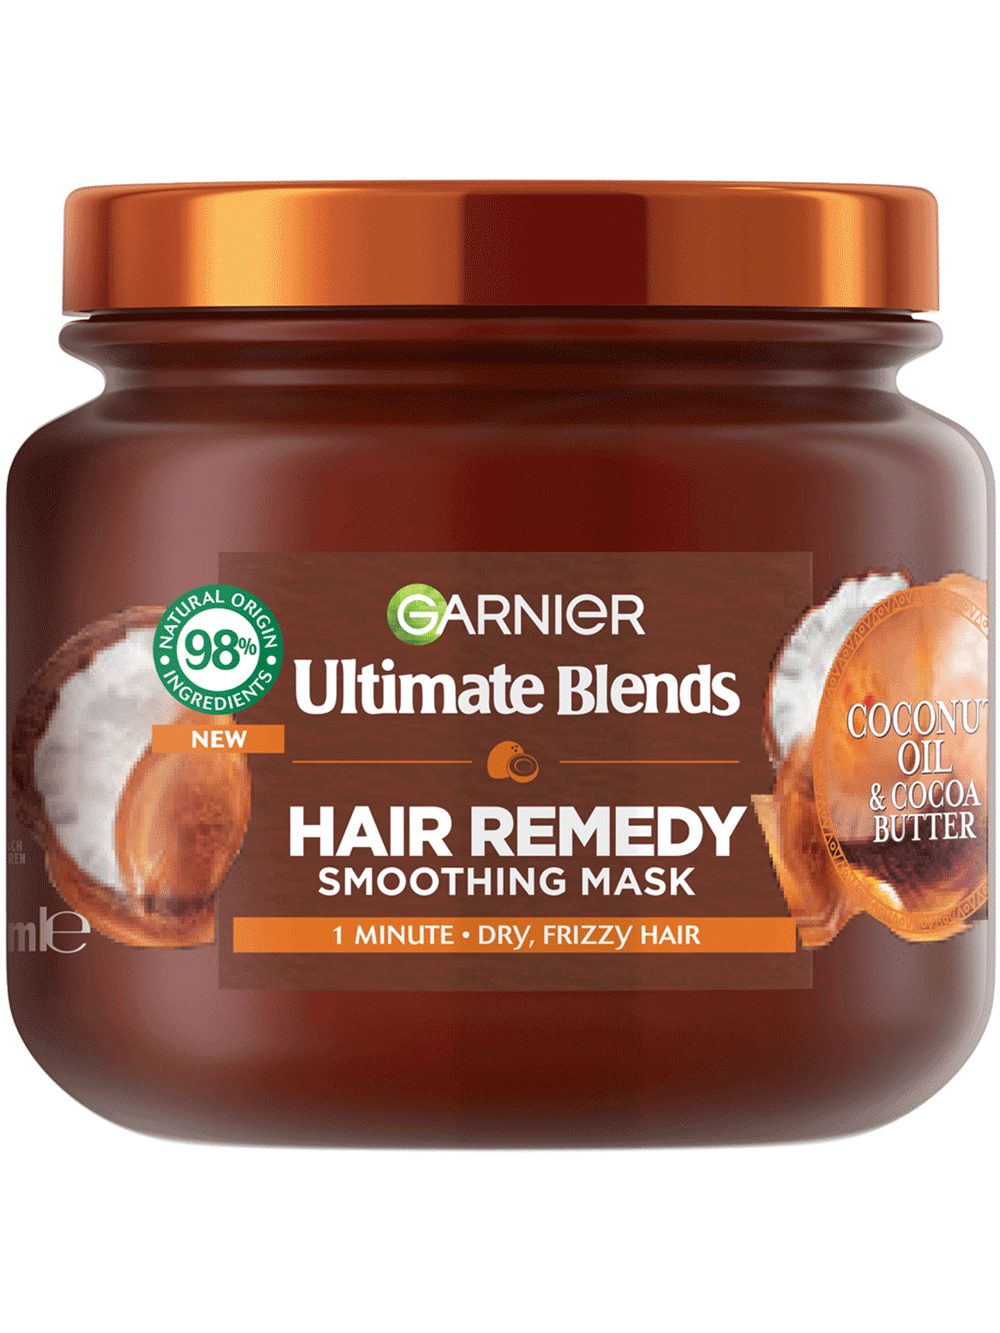 Coconut Oil & Cocoa Butter Smoothing Hair Remedy Mask